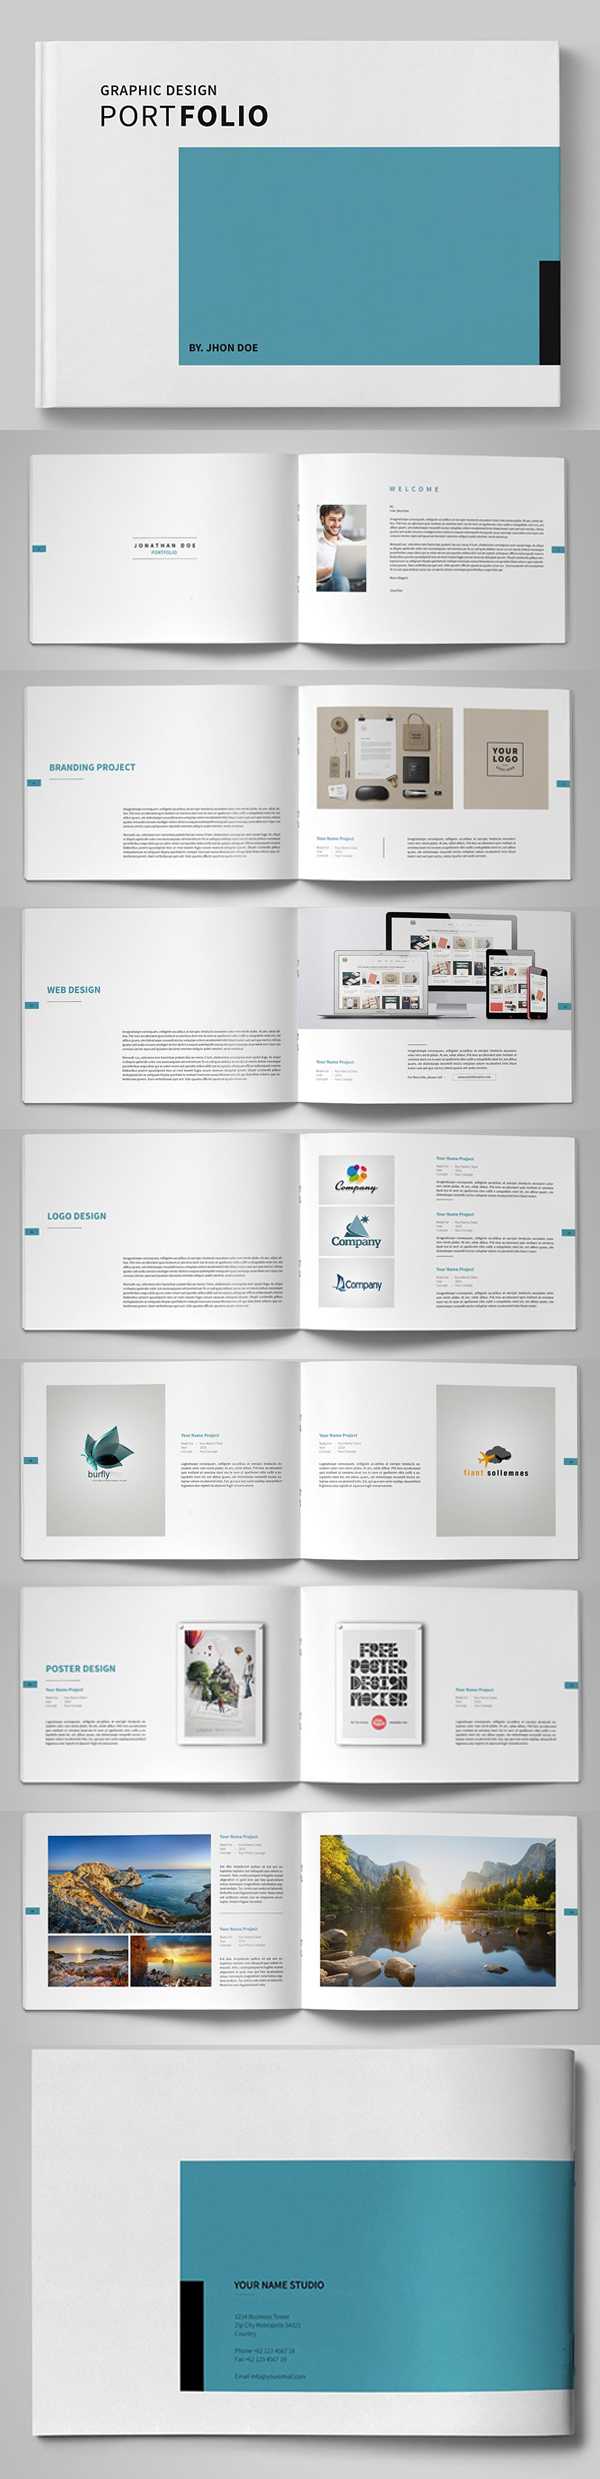 20 New Professional Catalog Brochure Templates | Design Throughout Brochure Templates Free Download Indesign